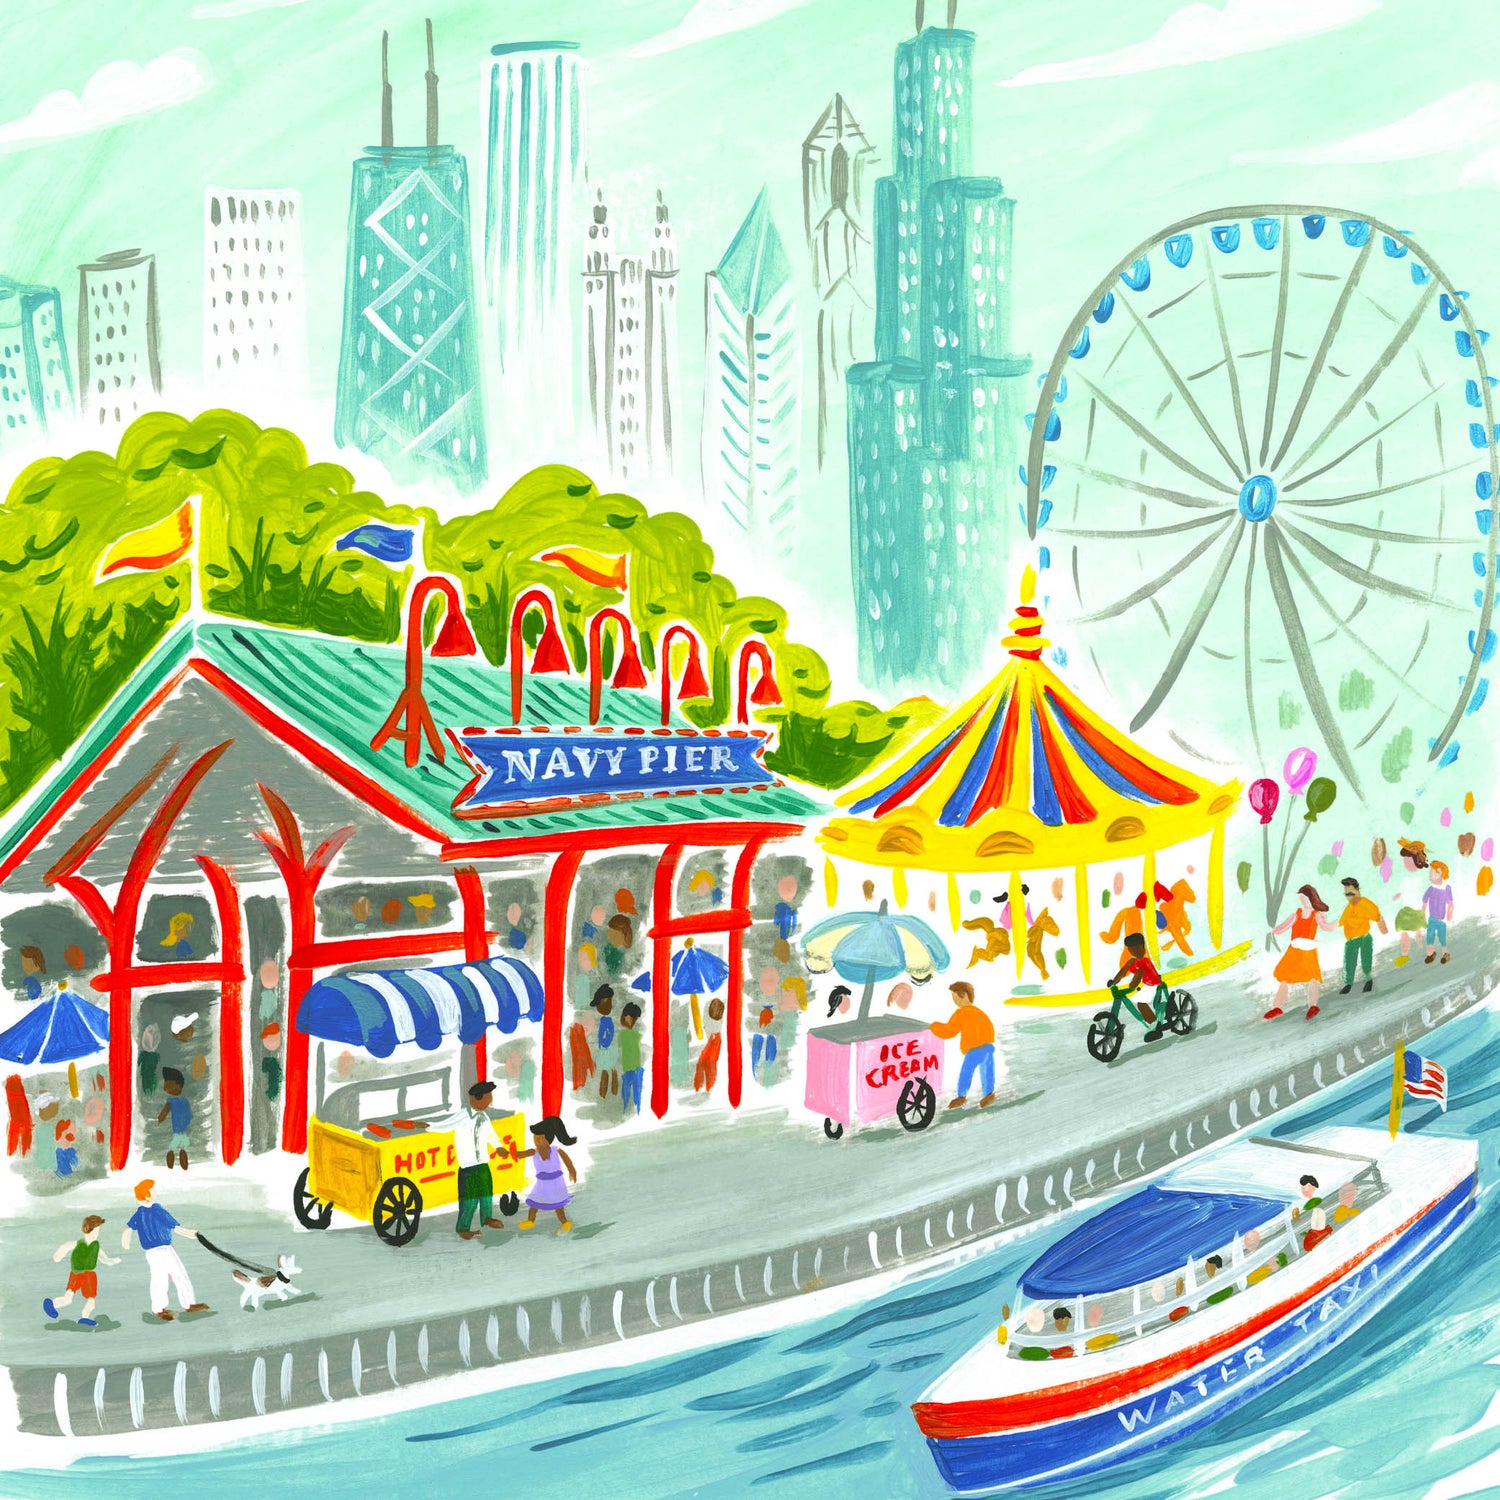 Downtown Chicago Navy Pier illustration detail with Chicago skyline; artwork by Angela Staehling